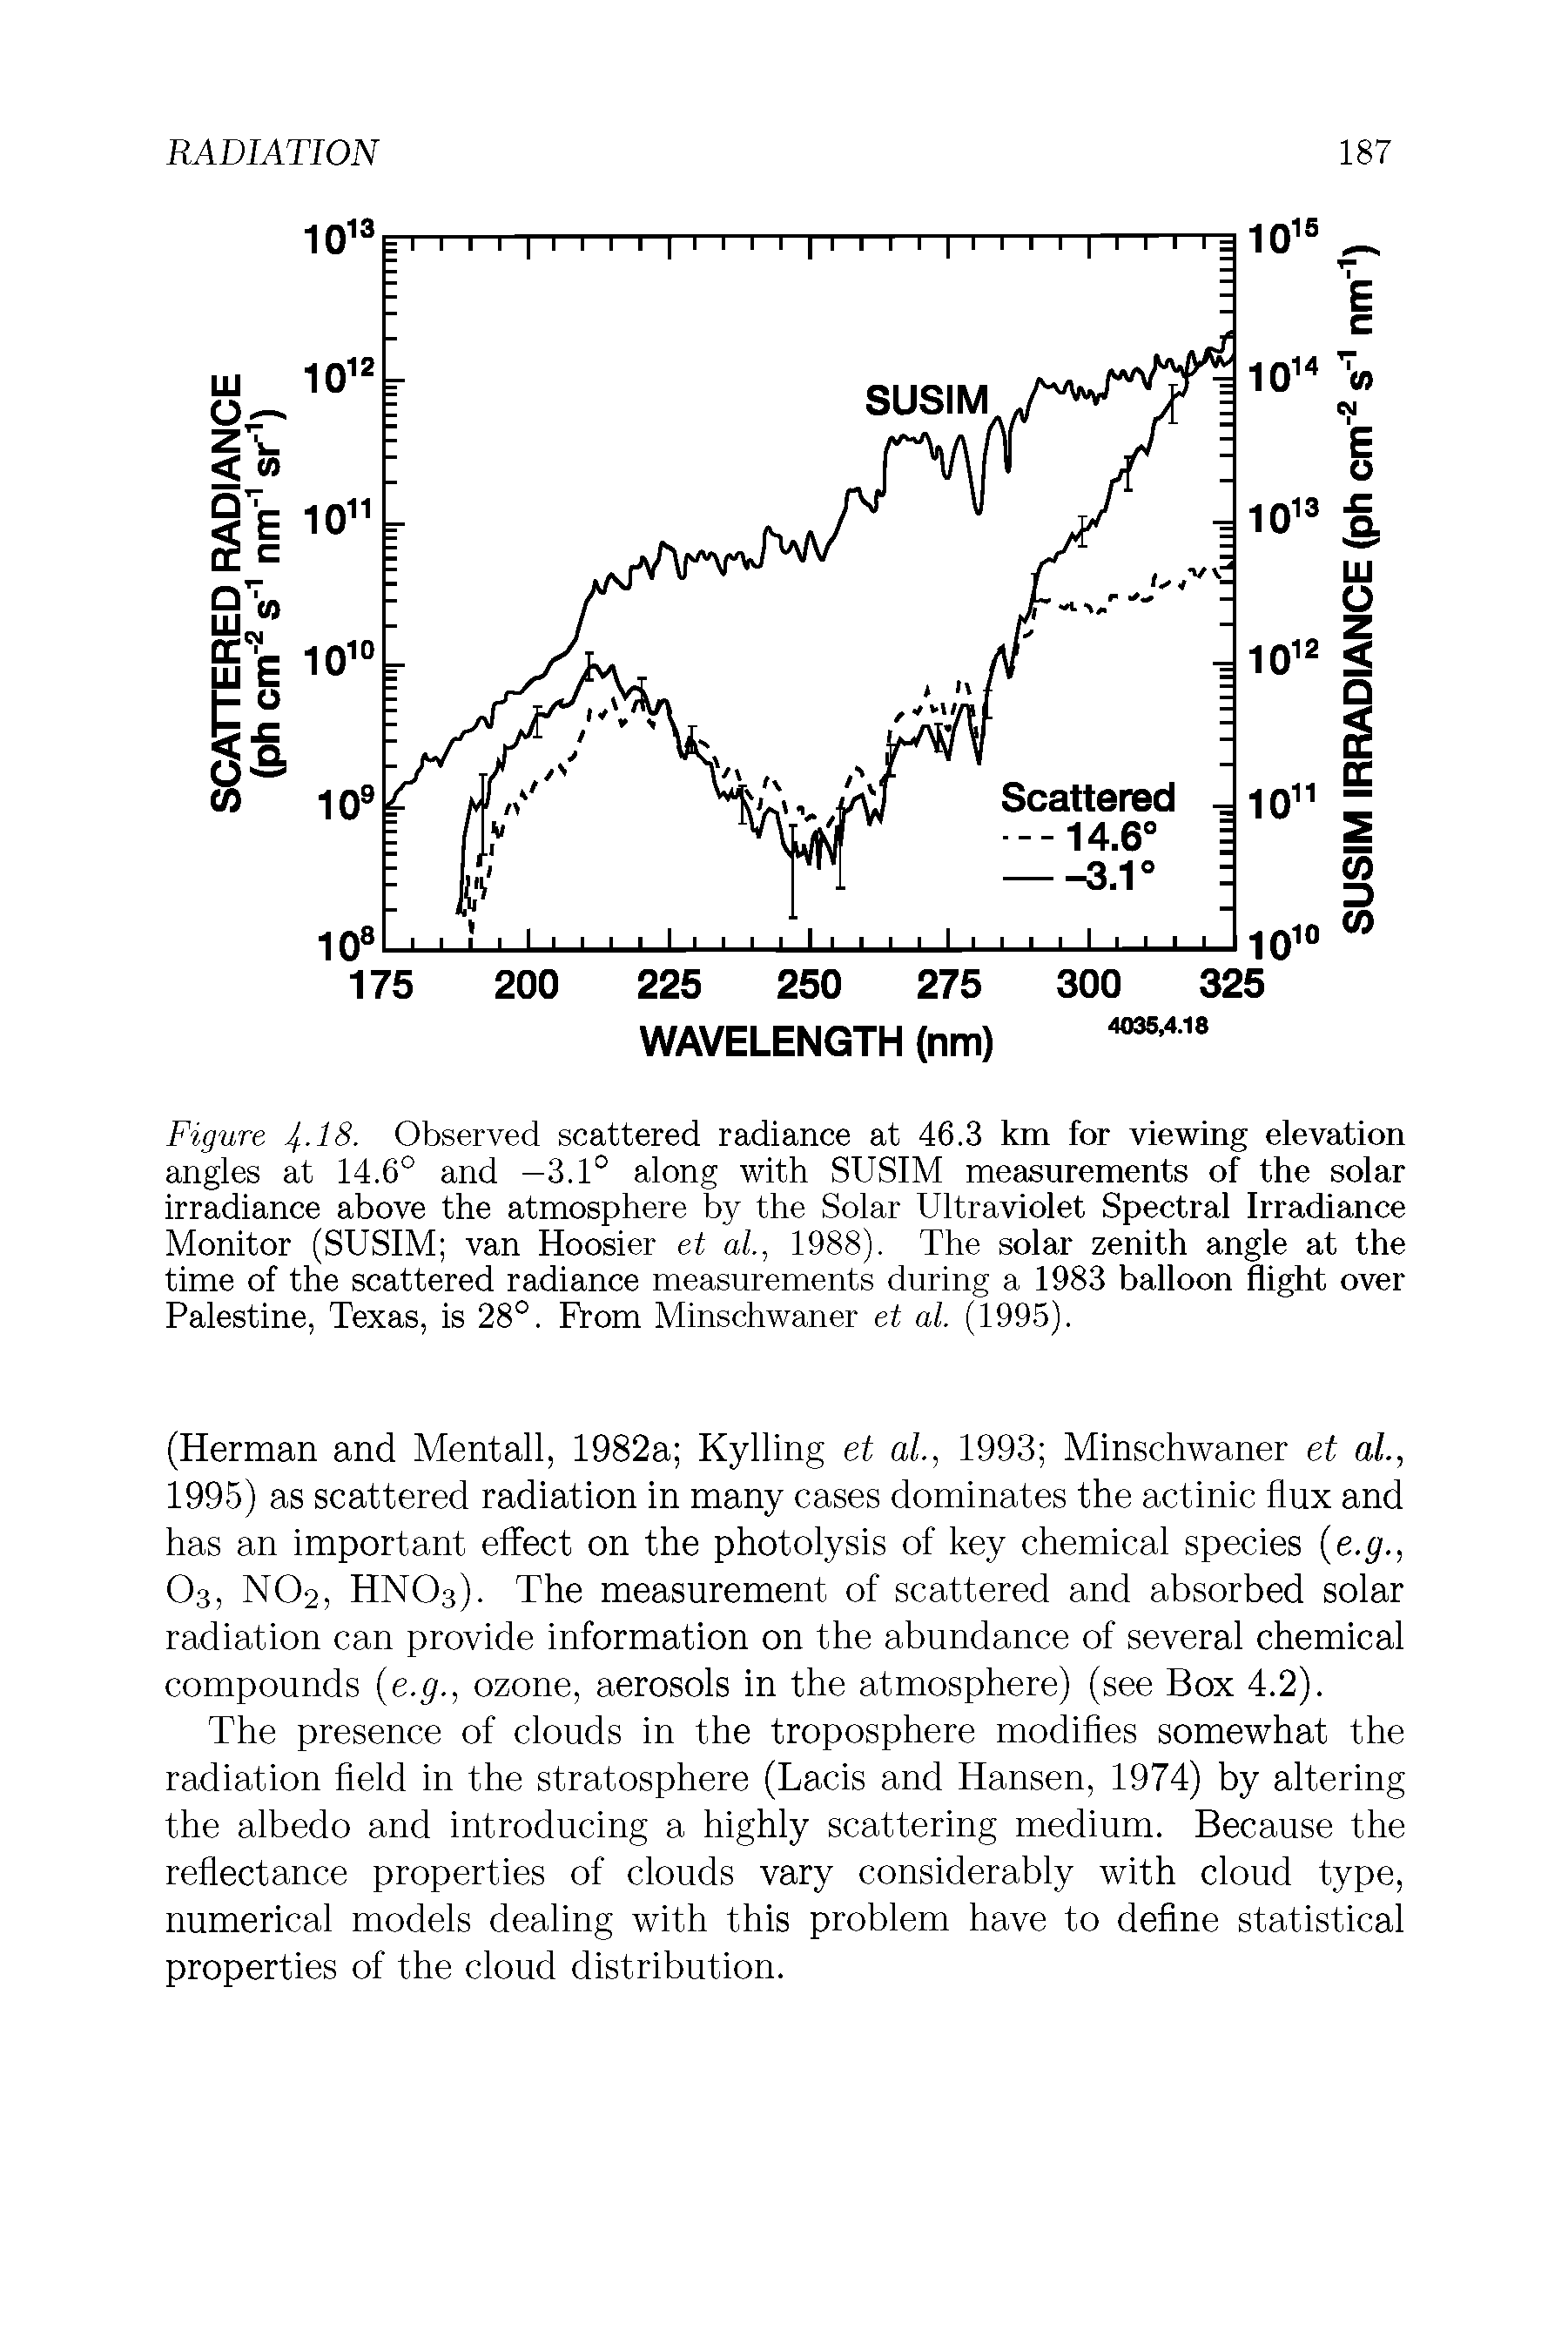 Figure 4-18. Observed scattered radiance at 46.3 km for viewing elevation angles at 14.6° and —3.1° along with SUSIM measurements of the solar irradiance above the atmosphere by the Solar Ultraviolet Spectral Irradiance Monitor (SUSIM van Hoosier et at, 1988). The solar zenith angle at the time of the scattered radiance measurements during a 1983 balloon flight over Palestine, Texas, is 28°. From Minschwaner et al. (1995).